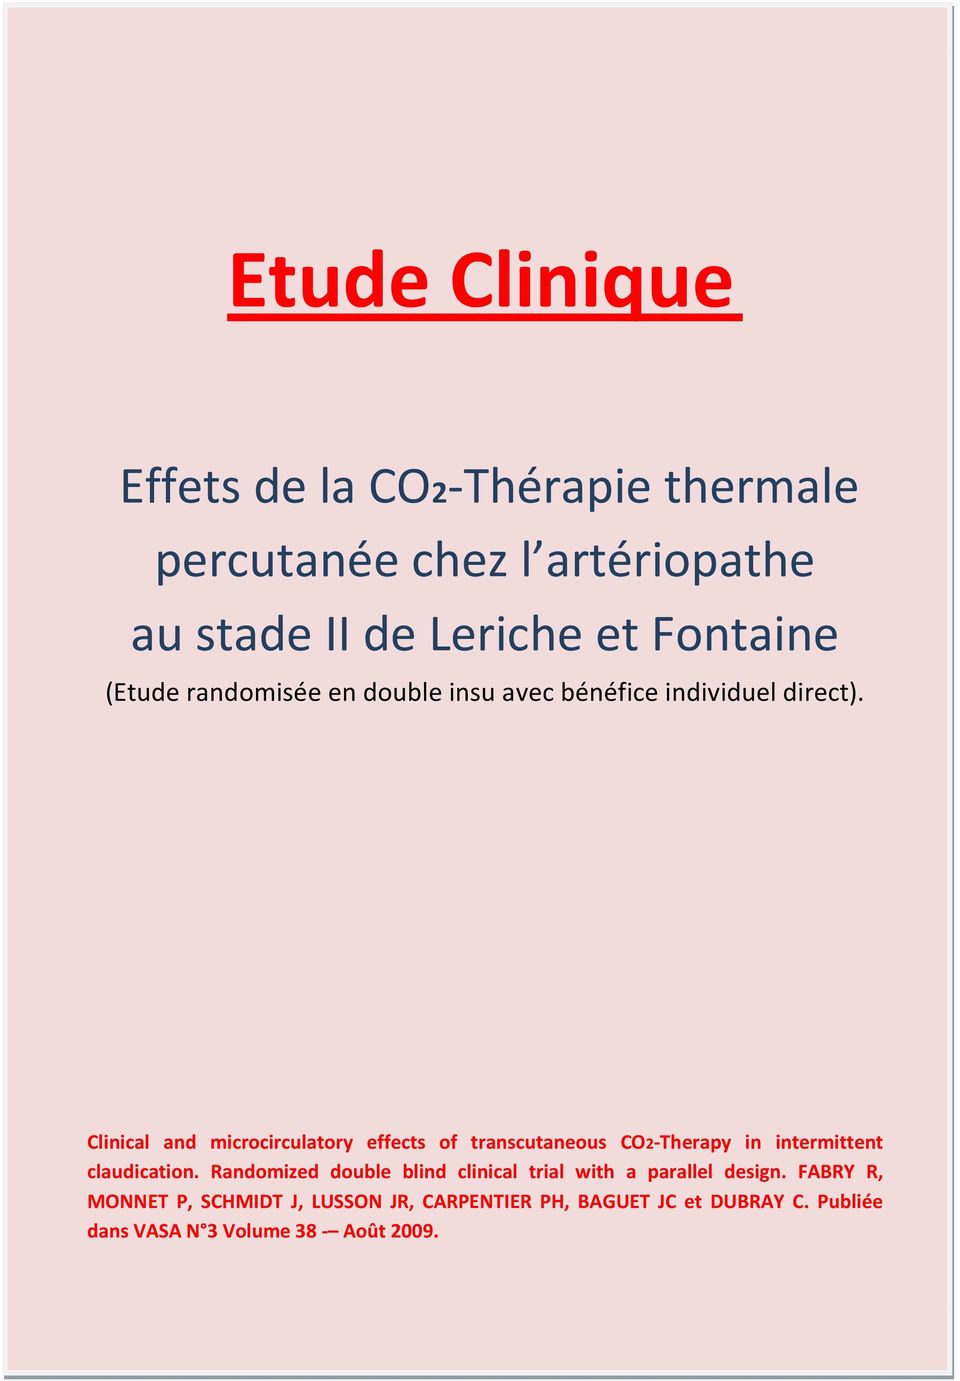 Clinical and microcirculatory effects of transcutaneous CO2-Therapy in intermittent claudication.